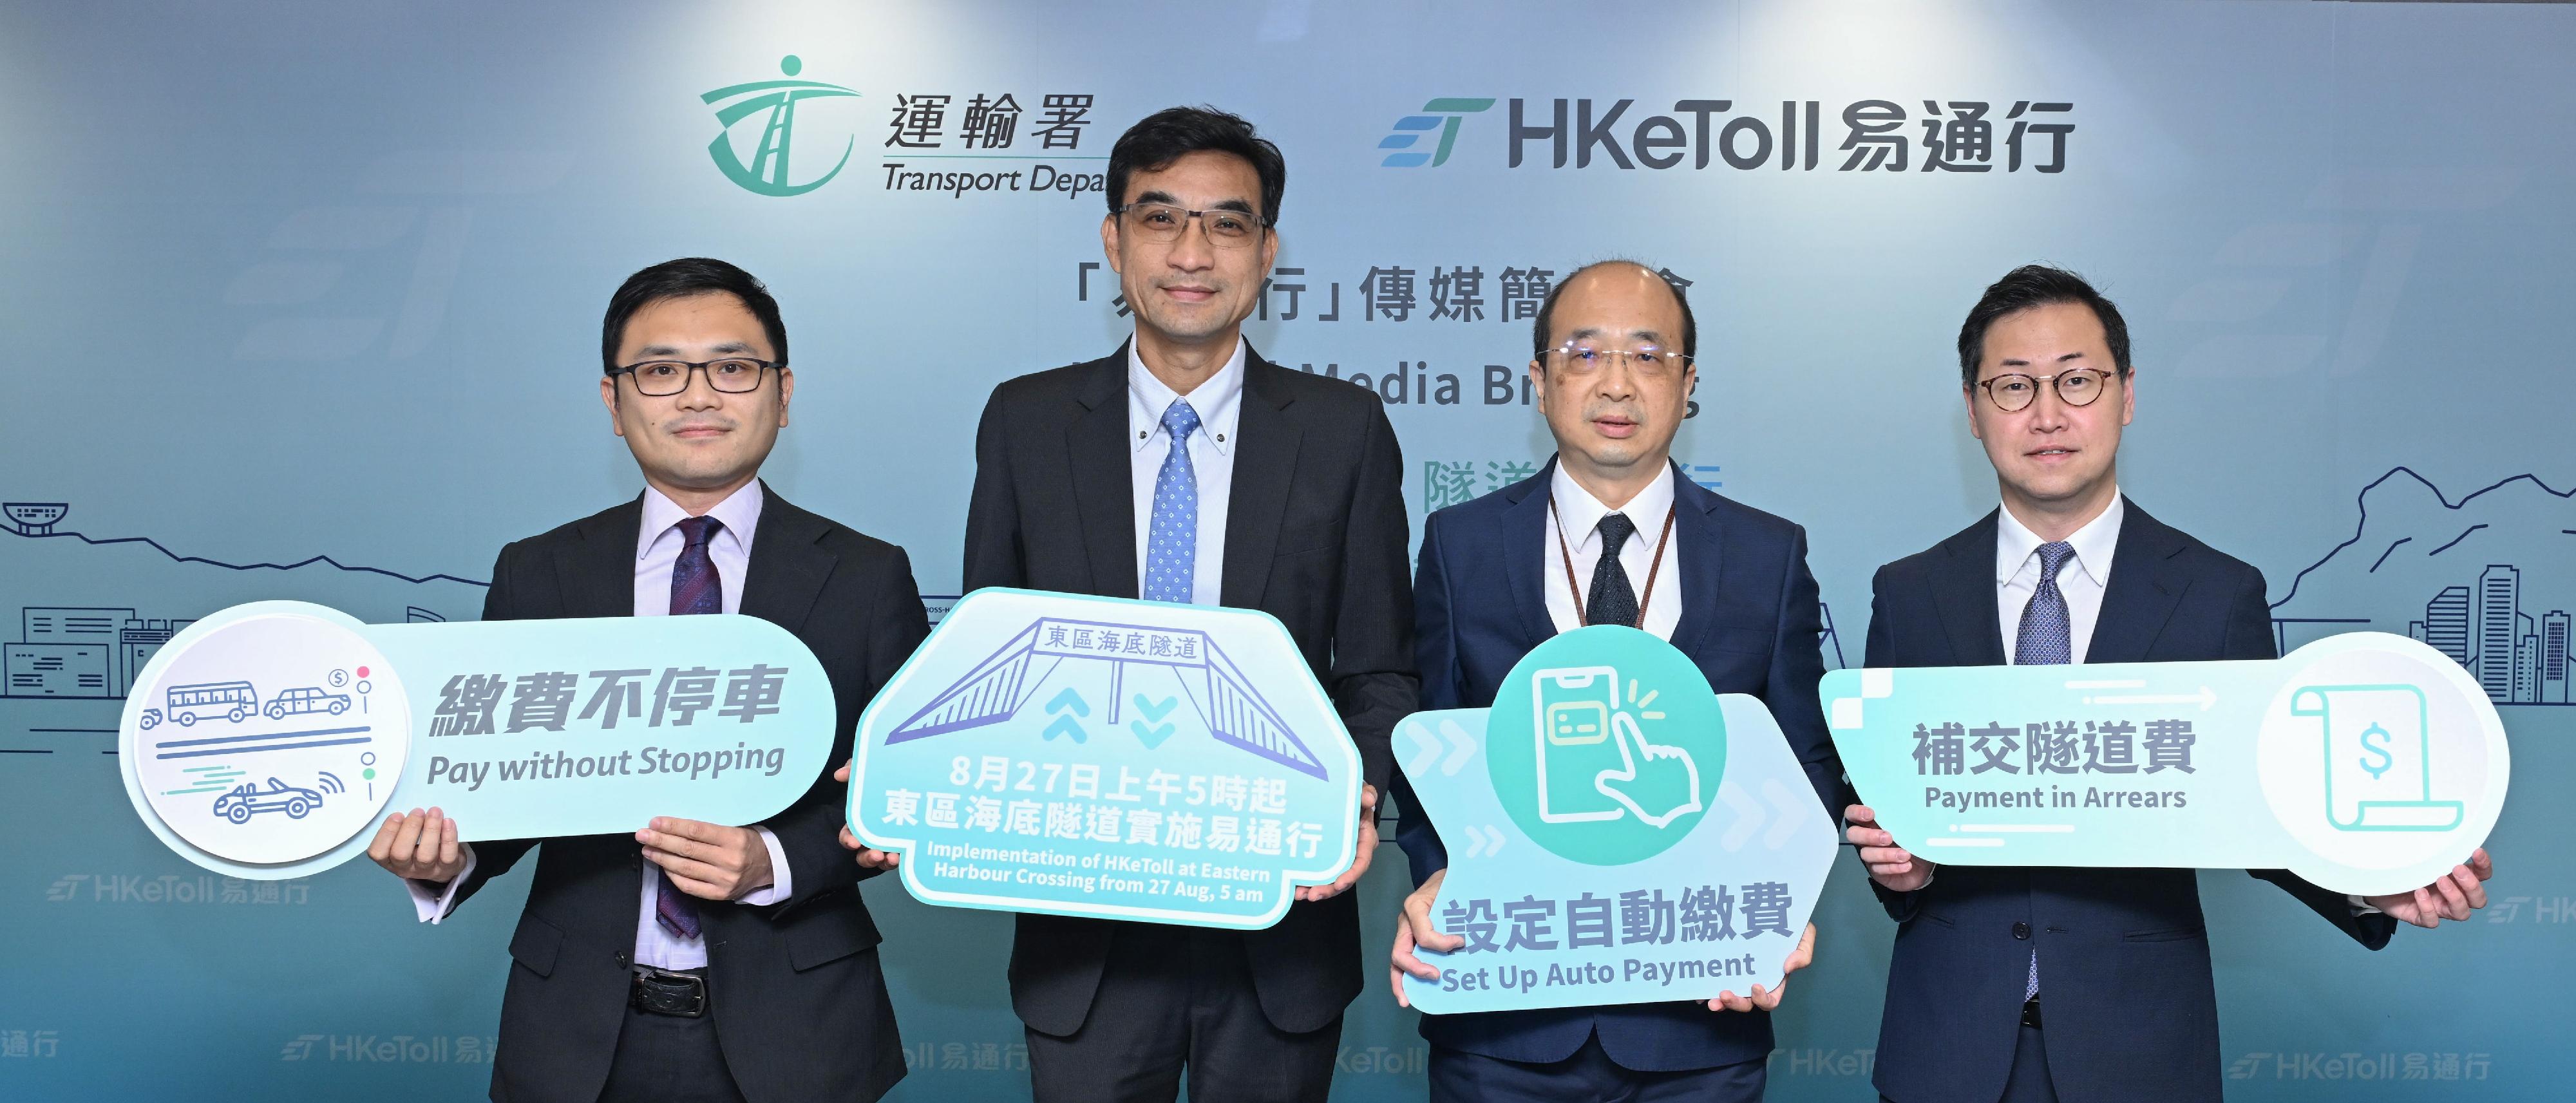 The Deputy Commissioner for Transport (Planning and Technical Services), Mr Patrick Ho (second left); the Principal Transport Officer (Management), Mr Albert Ho (first left); the Chief Traffic Engineer (Kowloon), Mr Gary Wong (second right); and the Chief Engineer (Smart Mobility), Mr George Fong (first right), of the Transport Department, held a briefing today (August 24) to introduce the implementation of the HKeToll in the Eastern Harbour Crossing from 5am on August 27.